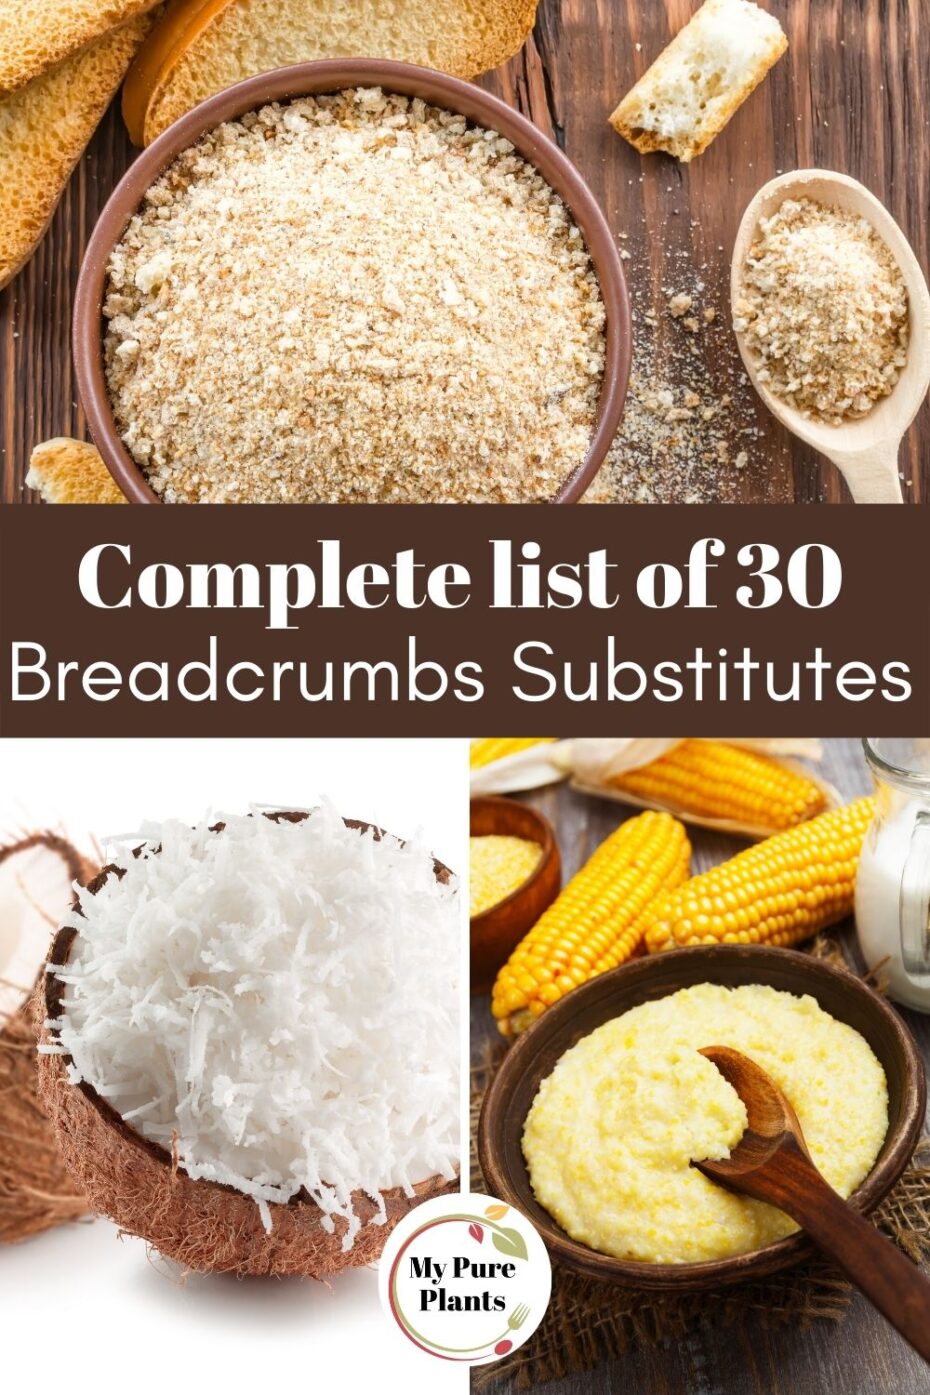 Different crumble-like food in small containers with a text overlay saying complete list of 30 breadcrumbs substitutes